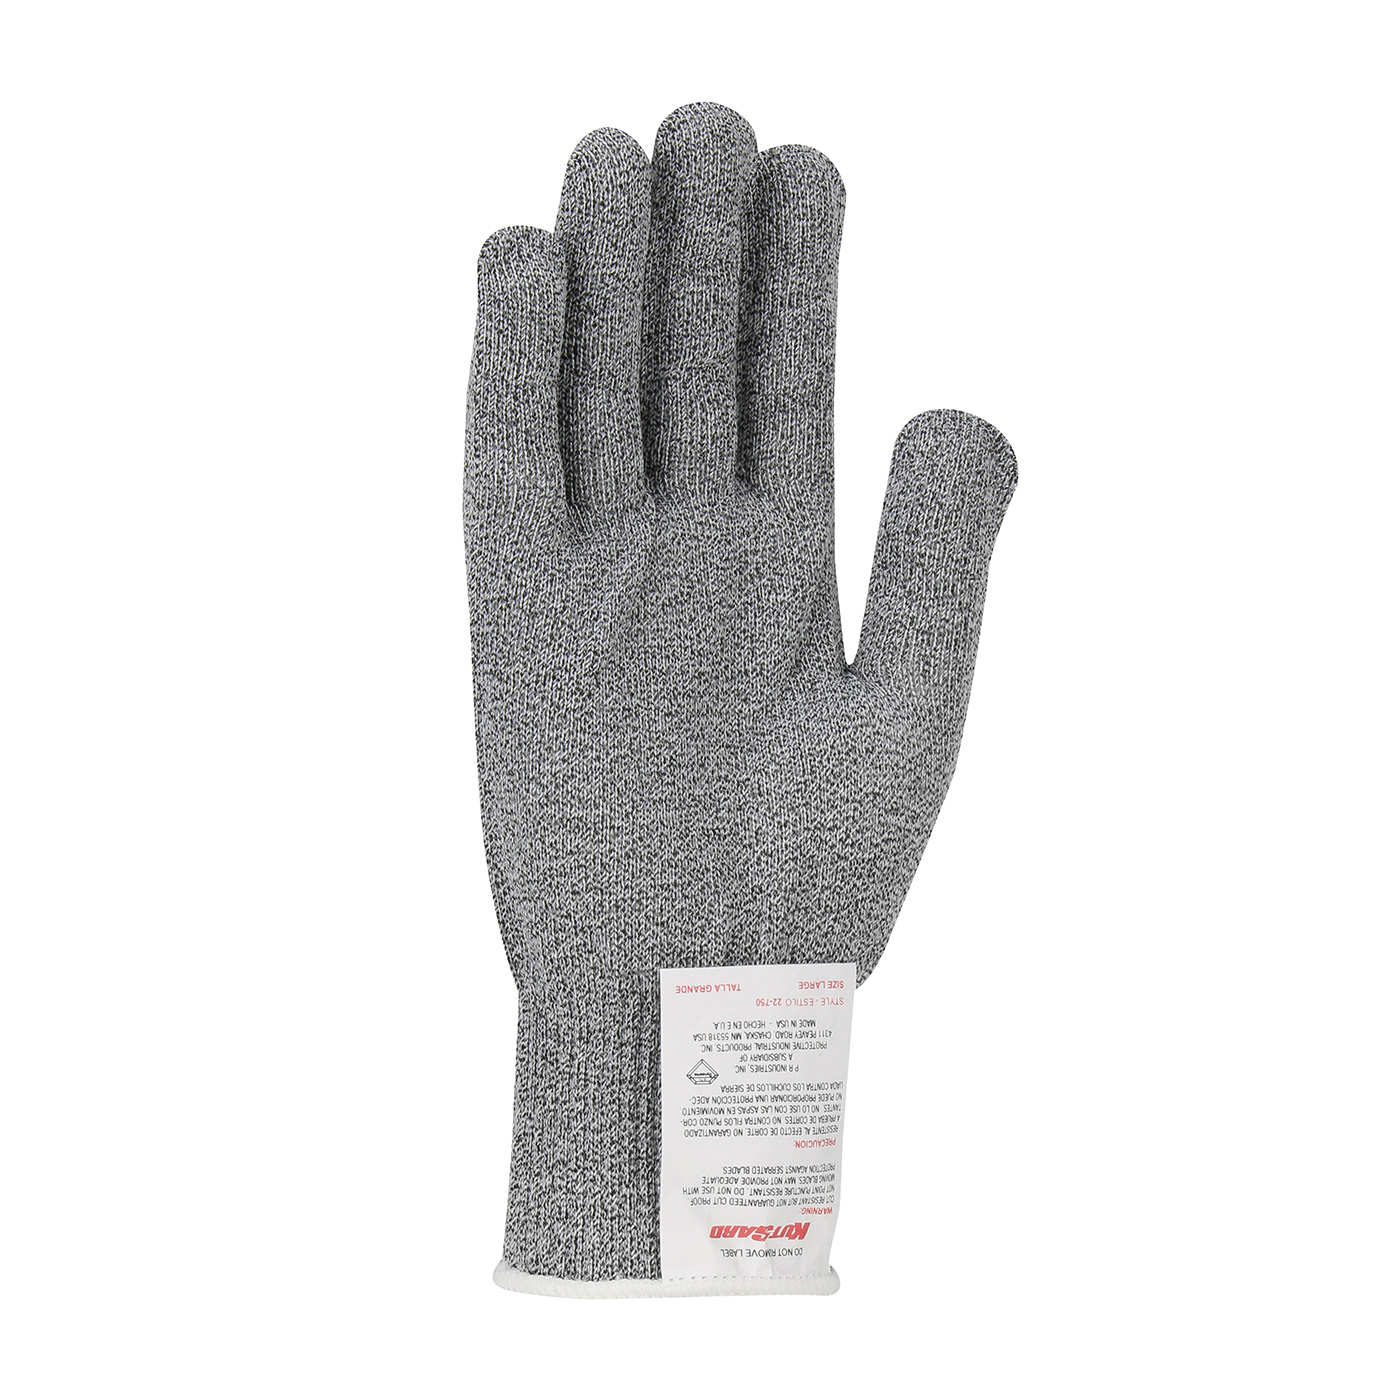 22-760G PIP® gray Claw Cover® Seamless Knit Dyneema® Blended Antimicrobial Glove - Medium Weight